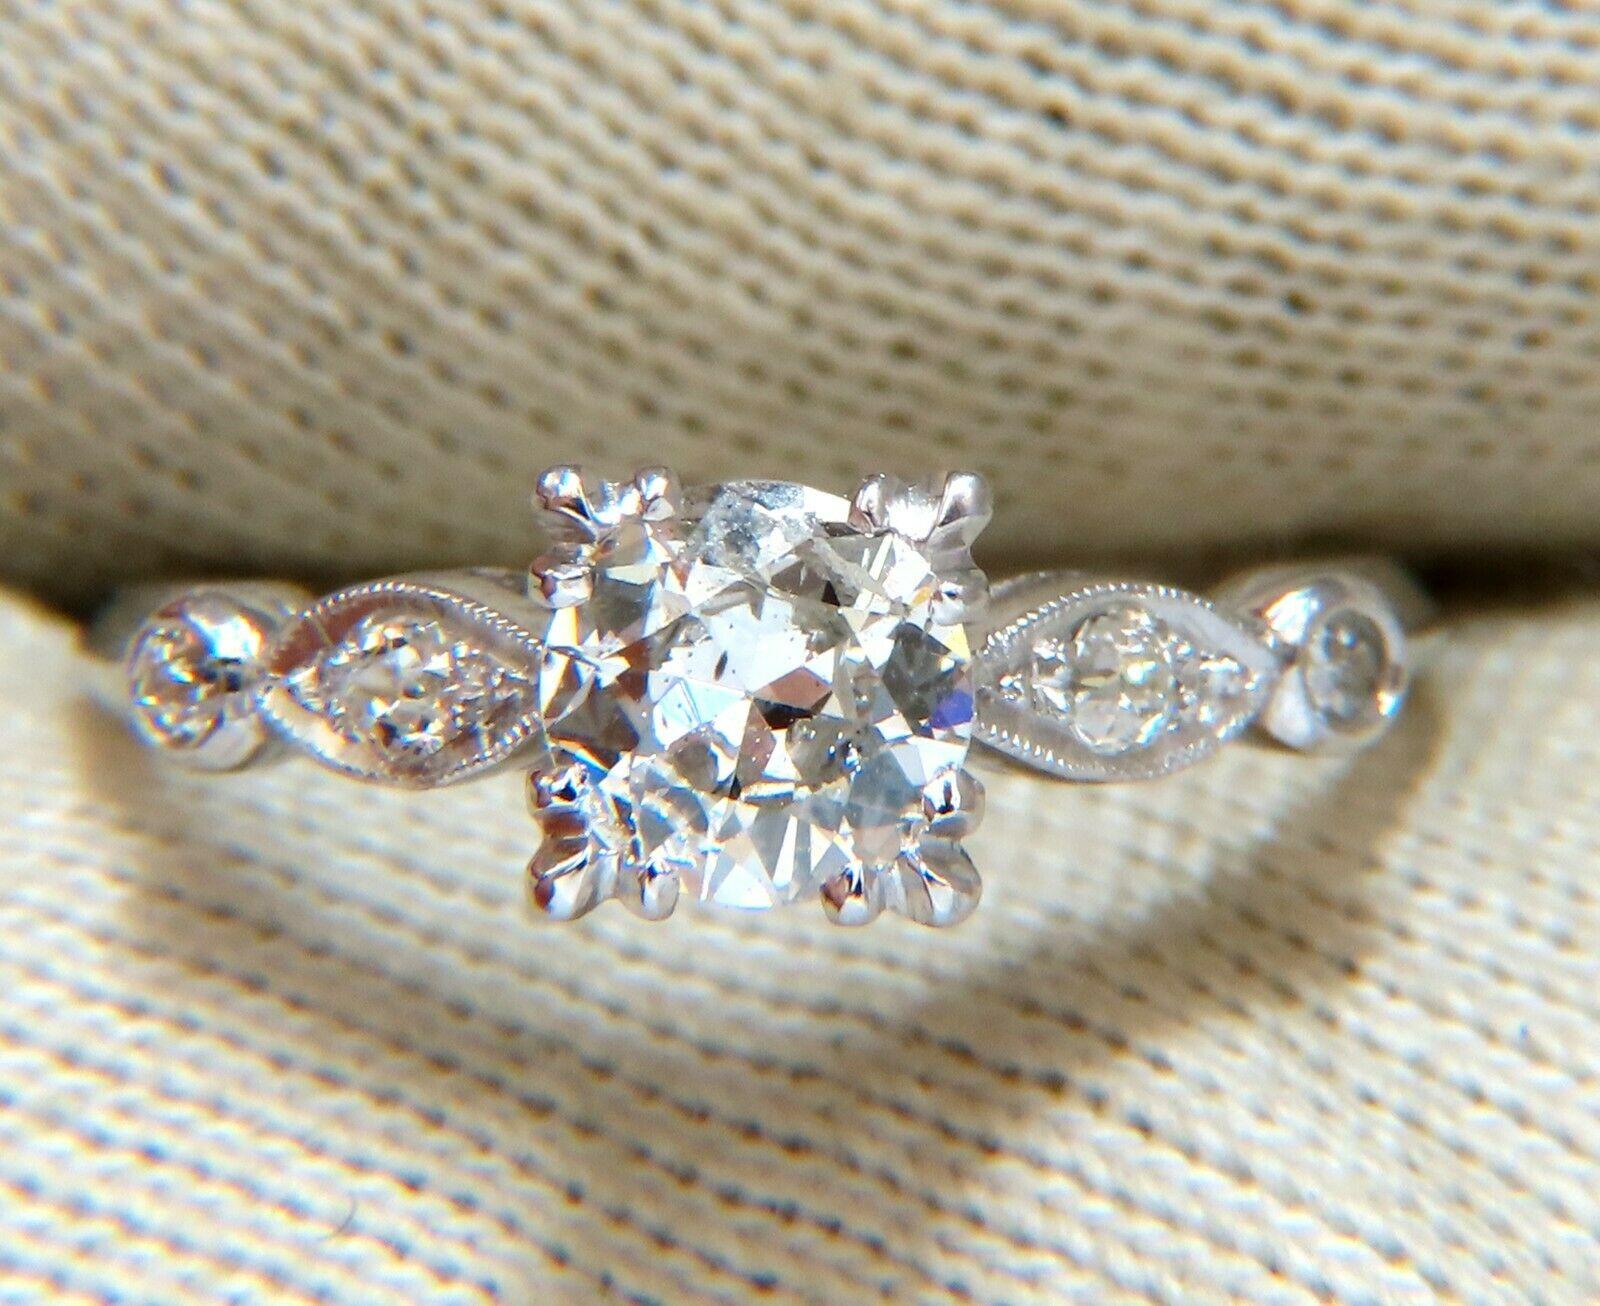 Vintage Elegance

.60ct Natural Round Cut Diamond 

5.8mm diameter

Si-2 clarity I color.

Side round Diamonds: .16ct

G-color Vs-2 Clarity

Platinum

3.4 Grams

Overall ring: 6.4mm wide

Depth: 5.7mm

Current ring size: 7

May professionally